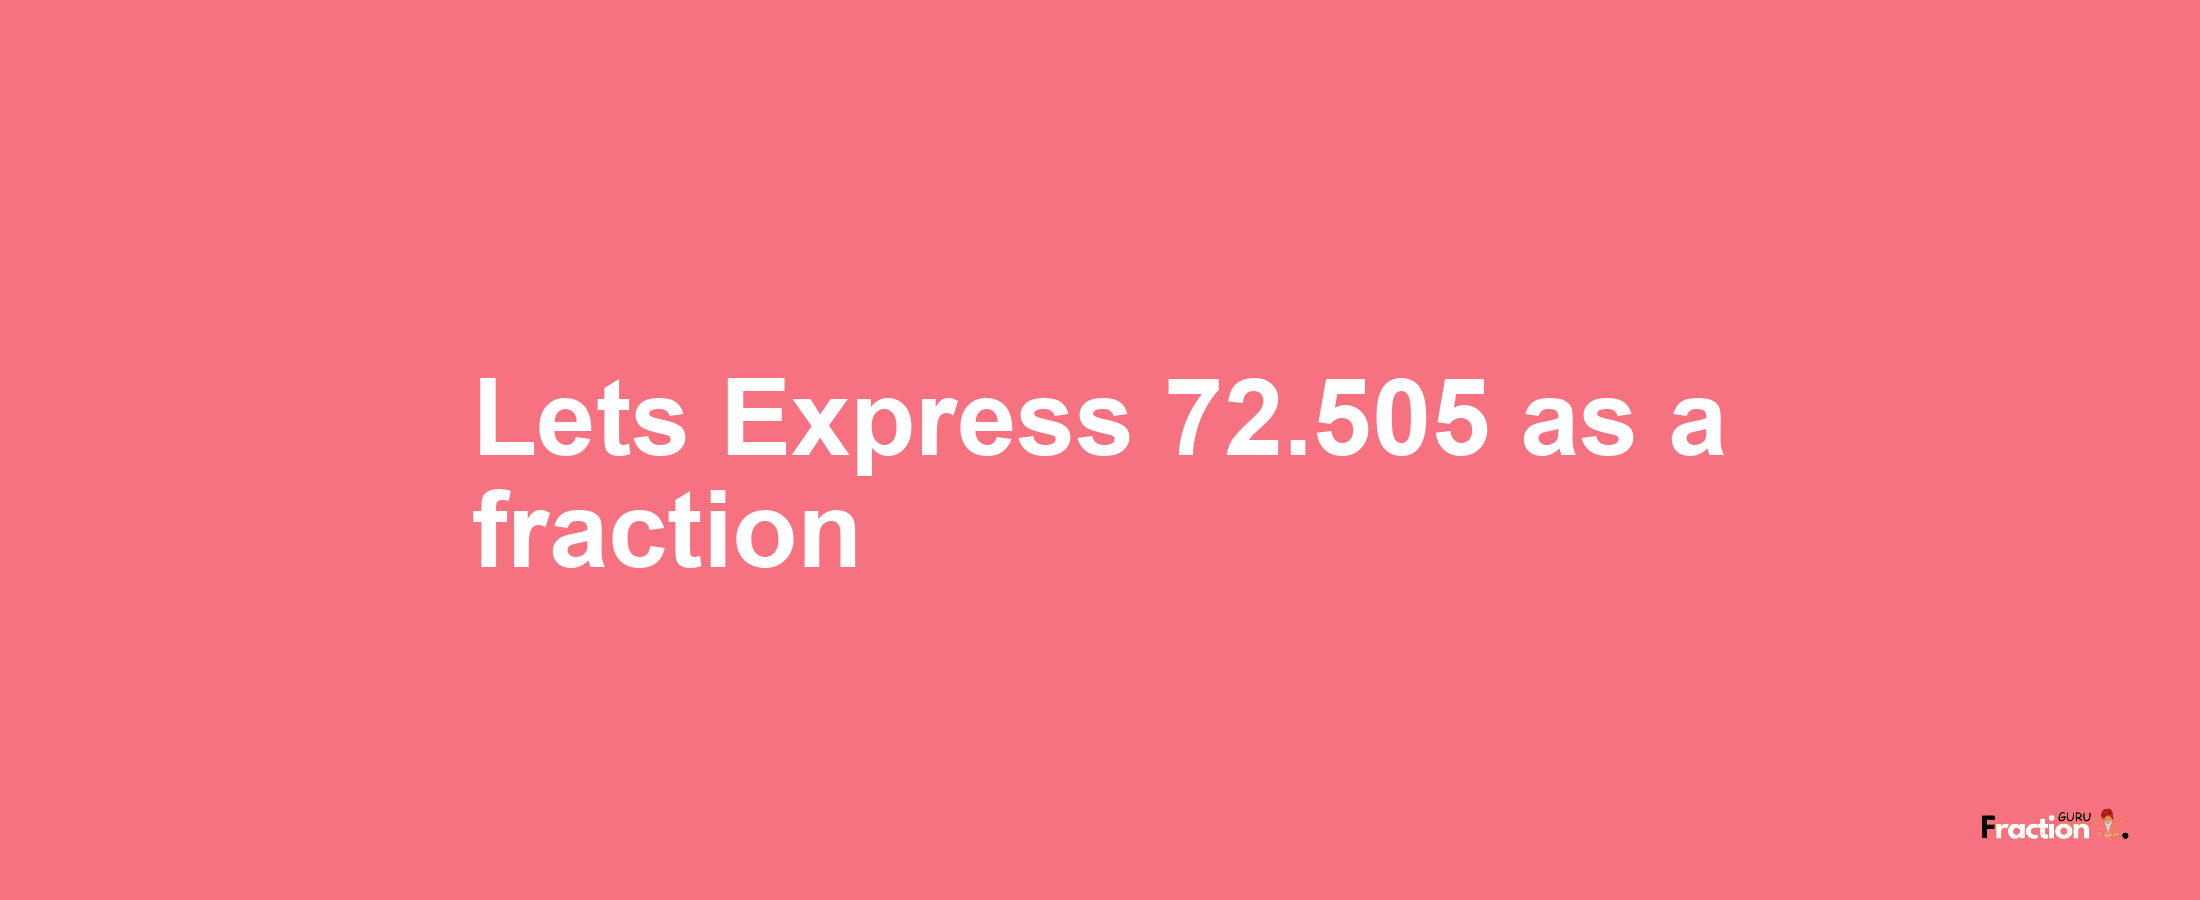 Lets Express 72.505 as afraction